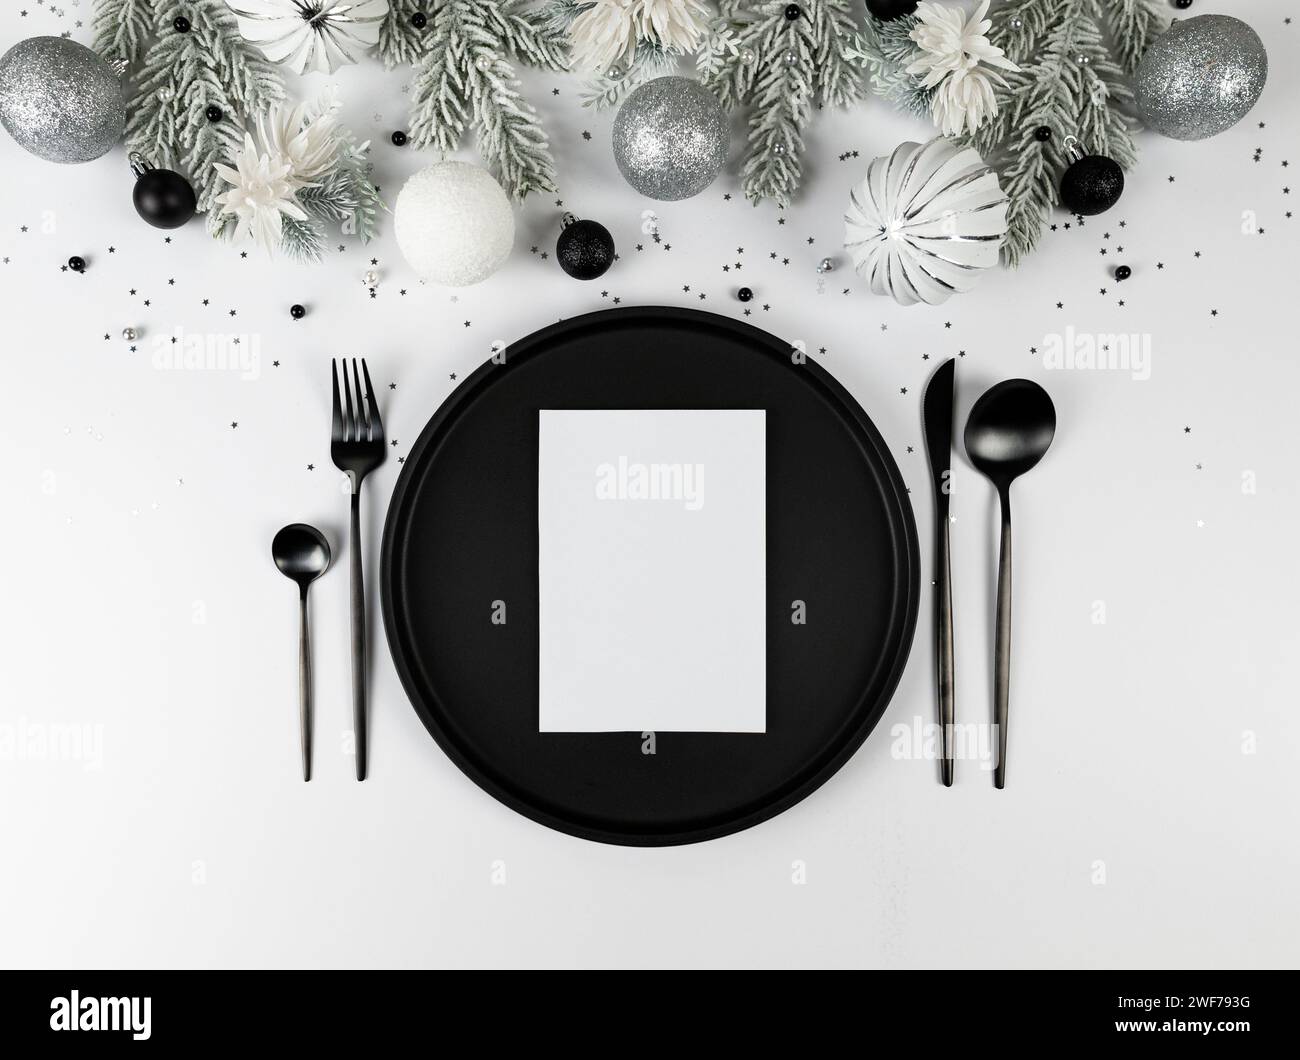 Christmas composition, white and silver decorations, black plate and cutlery, fir tree branches, white card on white background. Stock Photo